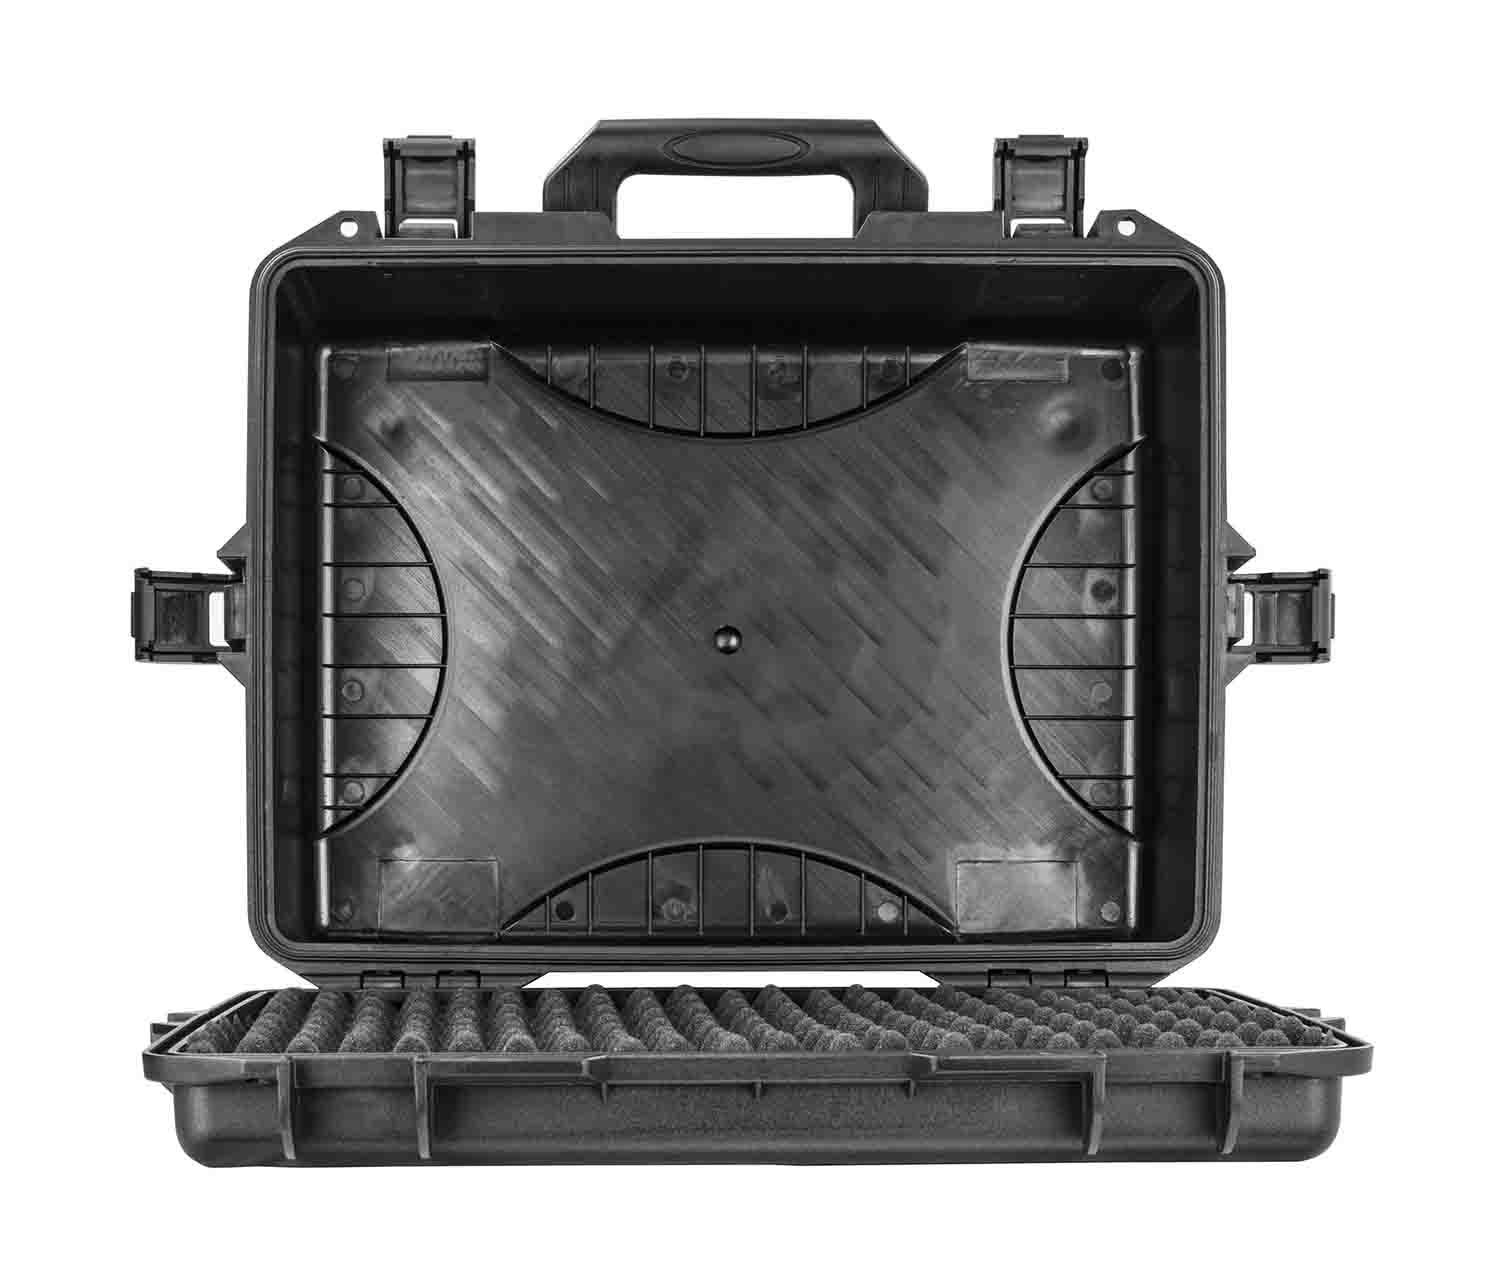 Odyssey VU191408 Bottom Interior with Pluck Foams Injection-Molded Utility Case - 19.25″ x 14.25″ x 8″ - Hollywood DJ